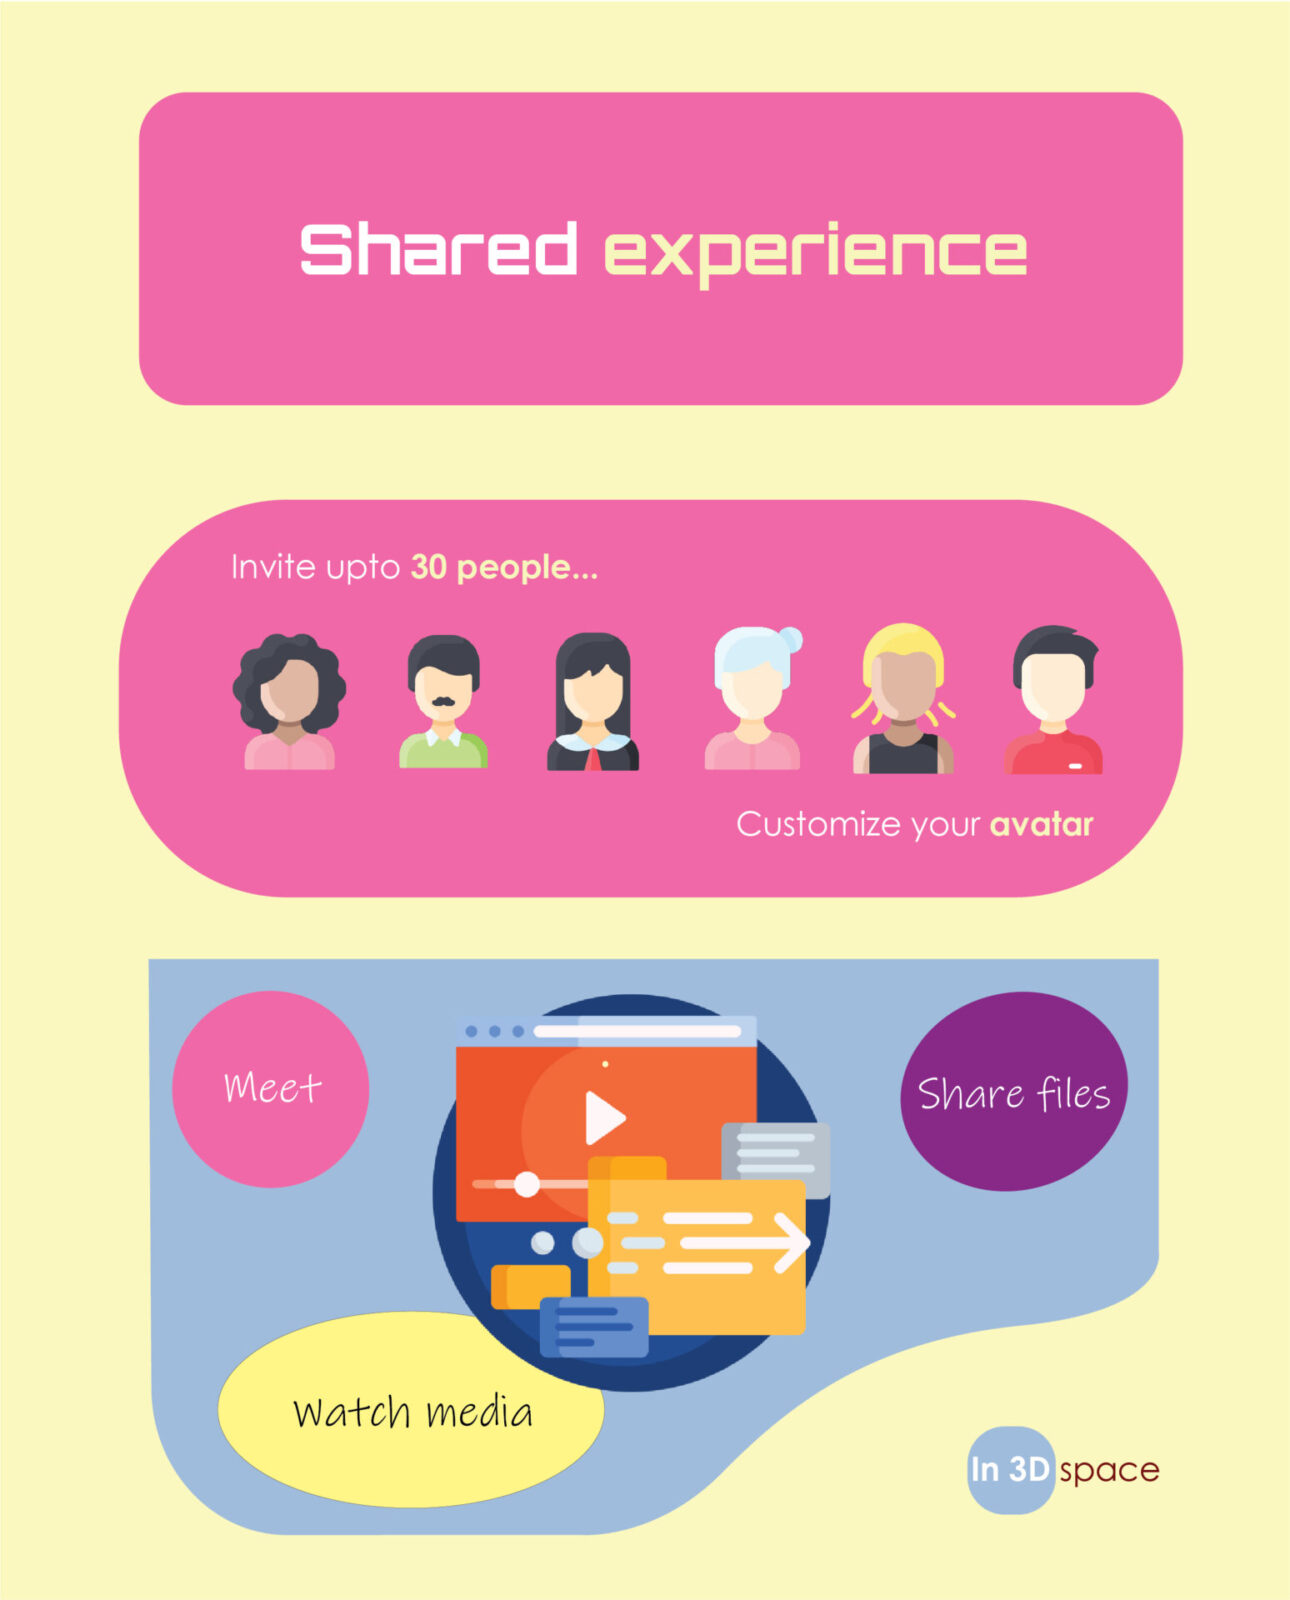 Shared Experience Poster "Invite up to 30 people, customize your avatar, meet, watch media and share files in 3D space."